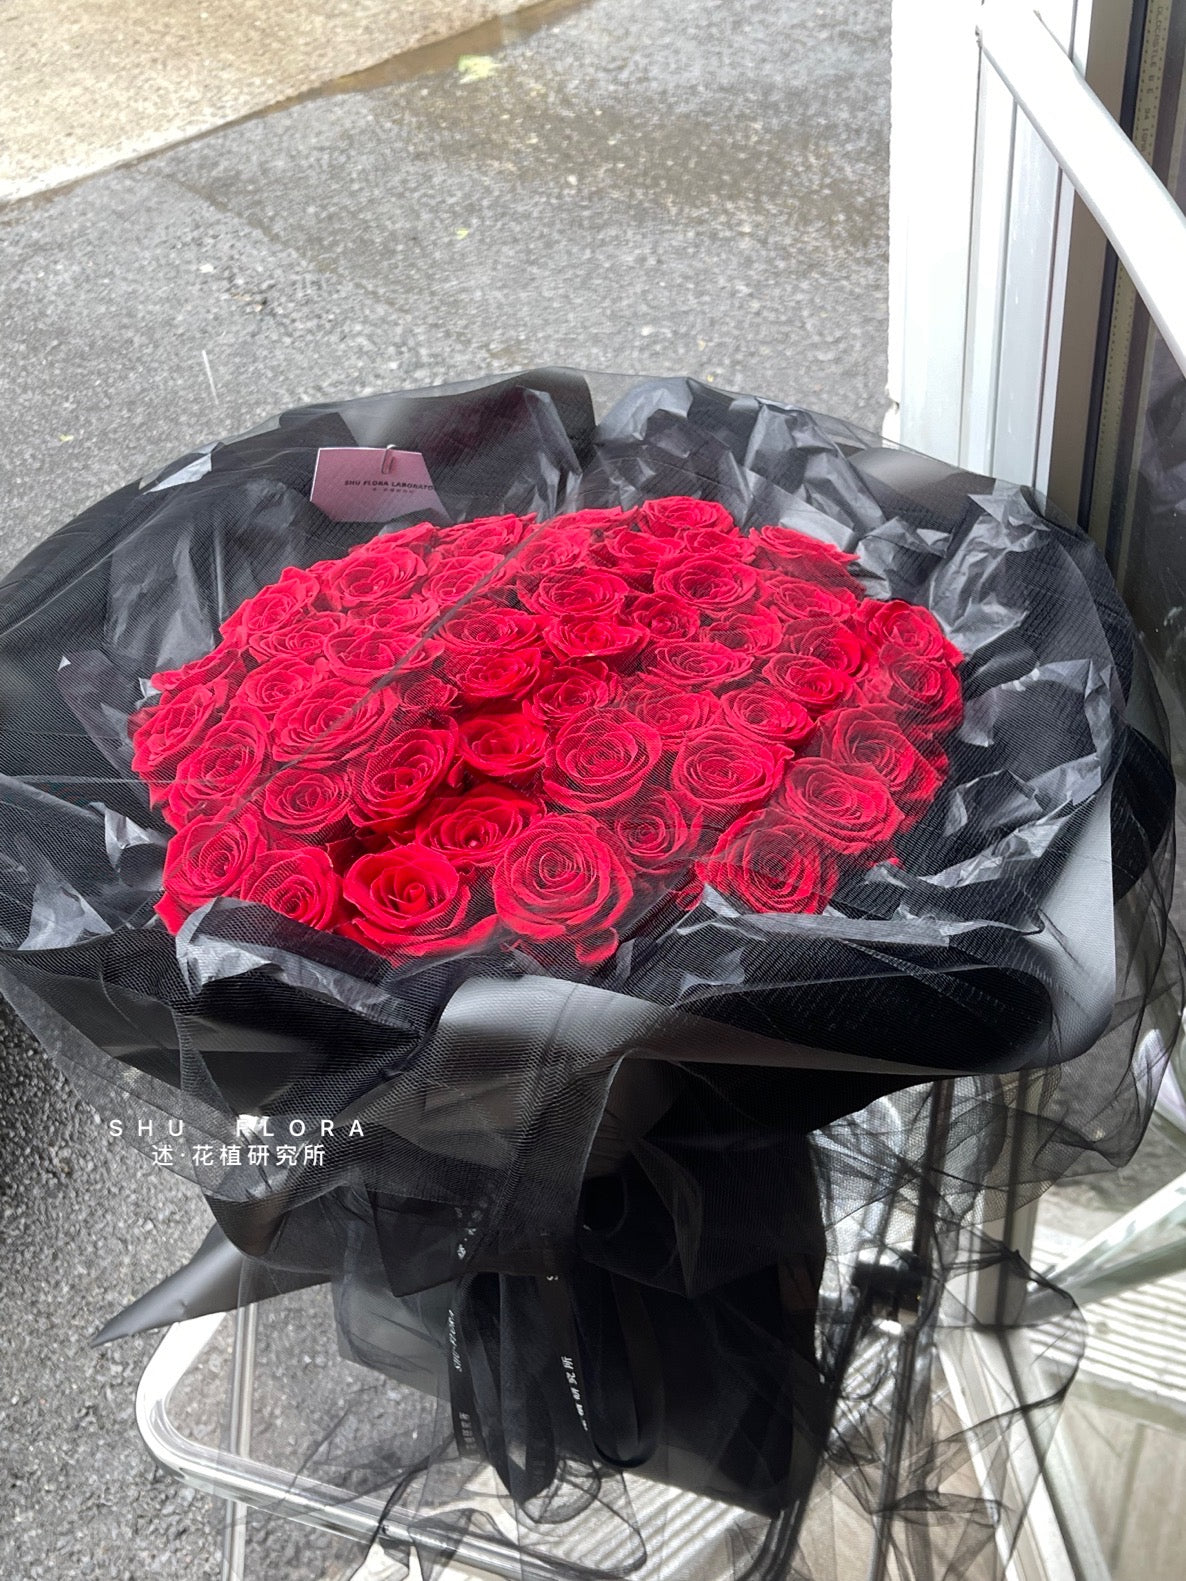 Classic Red Roses Bouquet with Chiffon